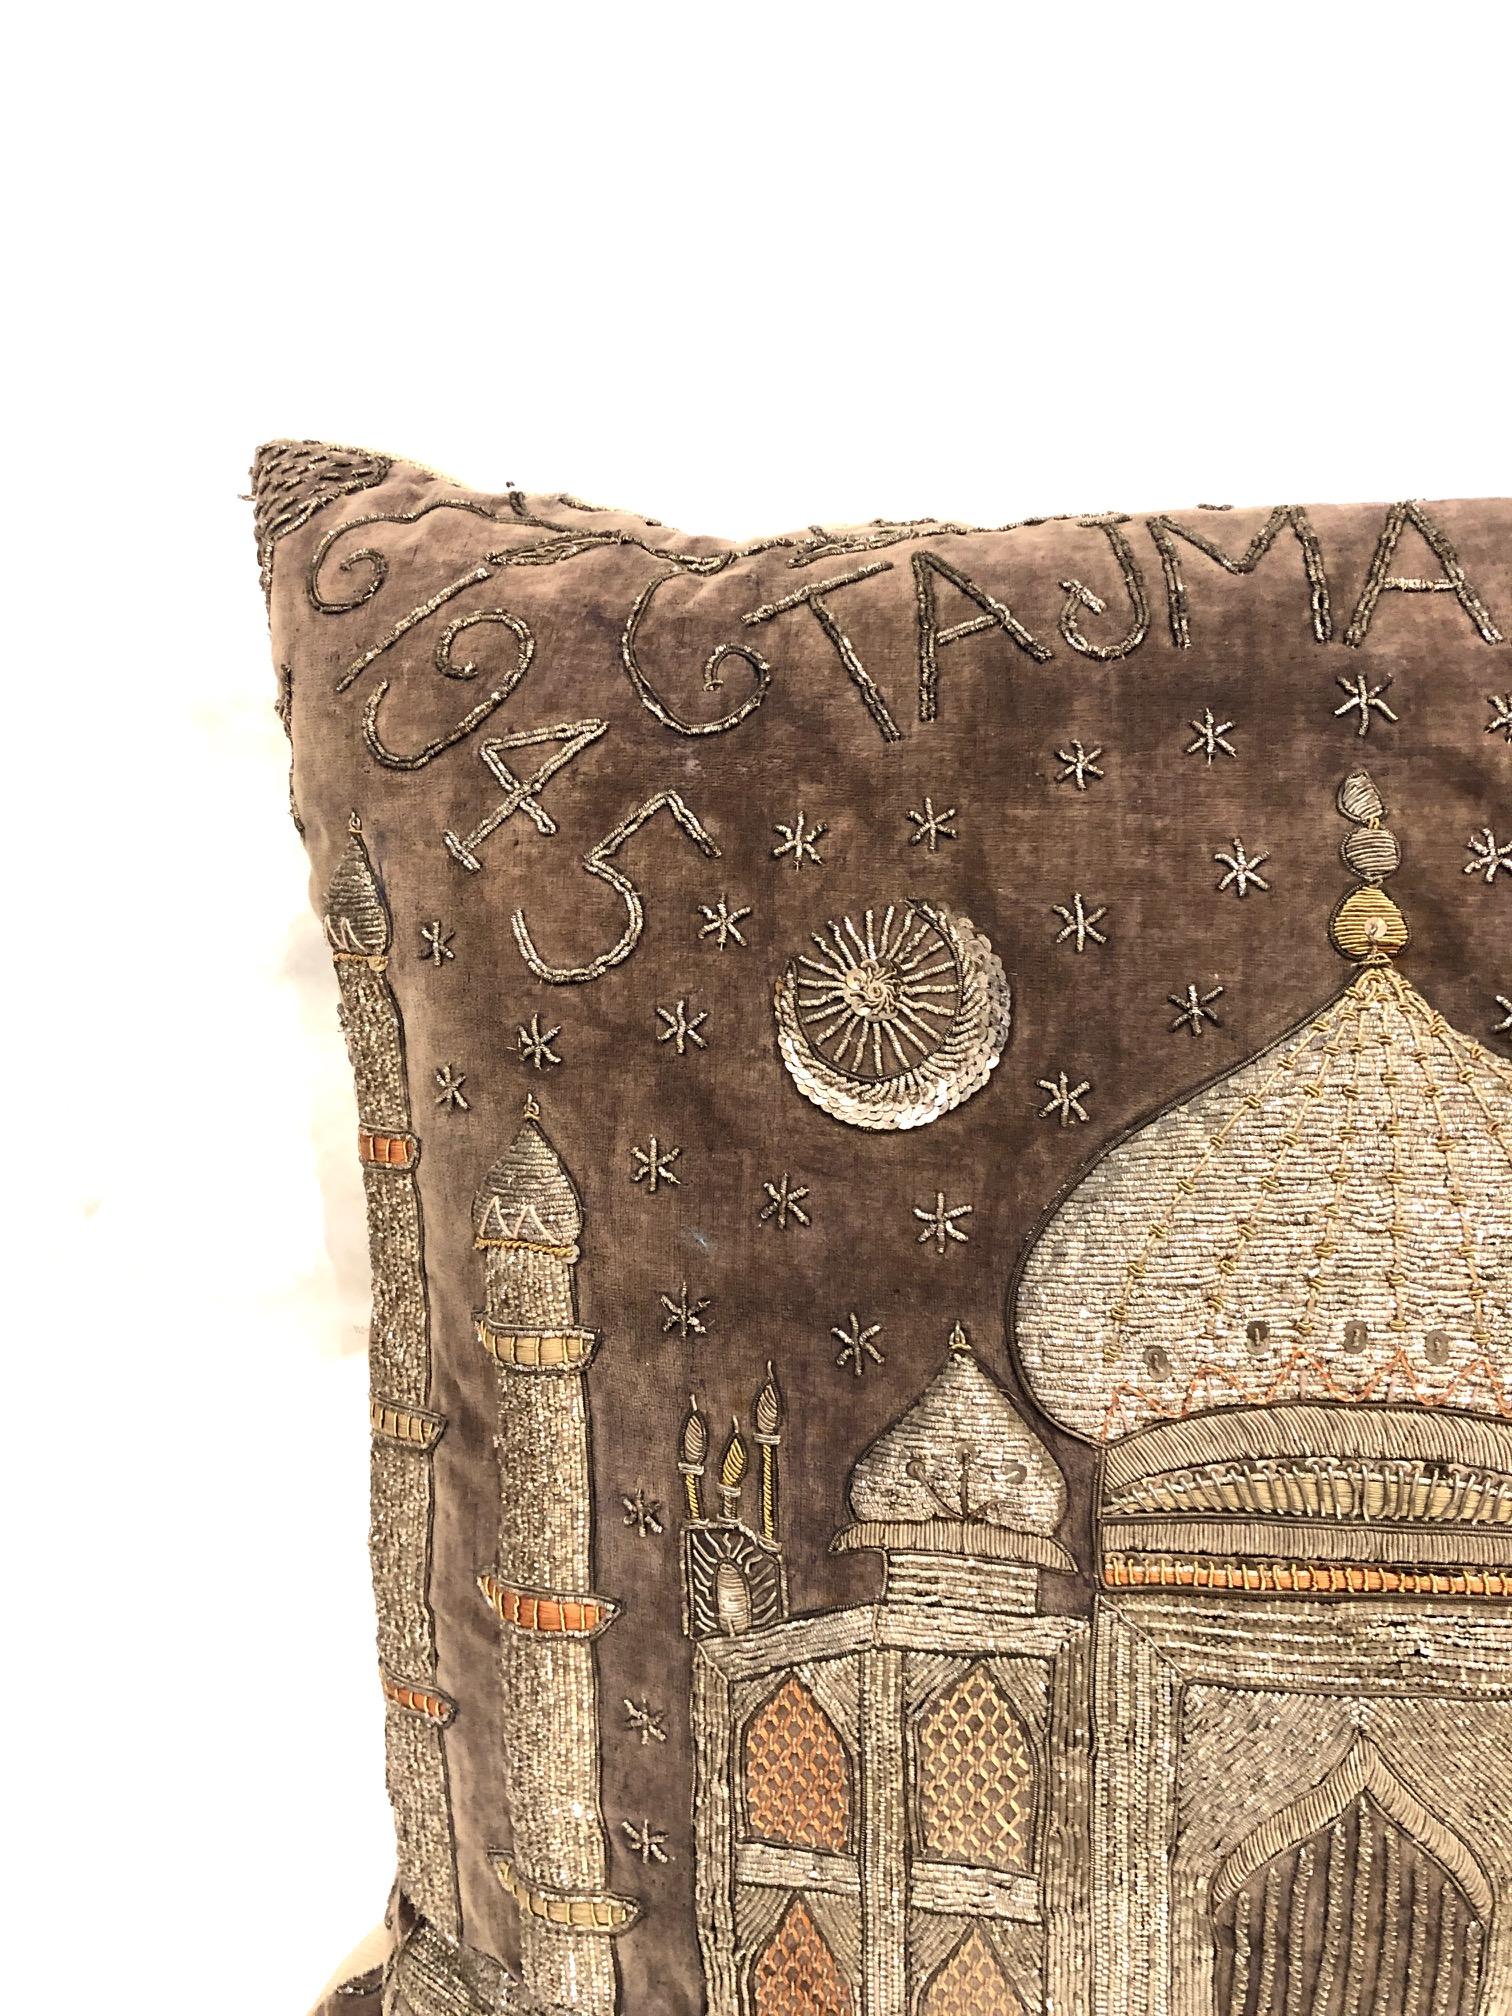 Beautifully embroidered pillow with silver and gold threads, sequins make this pillow sparkle with its Taj Mahal 1945 Agra writing on a silk velvet ground. Burlap backing. Zipper.